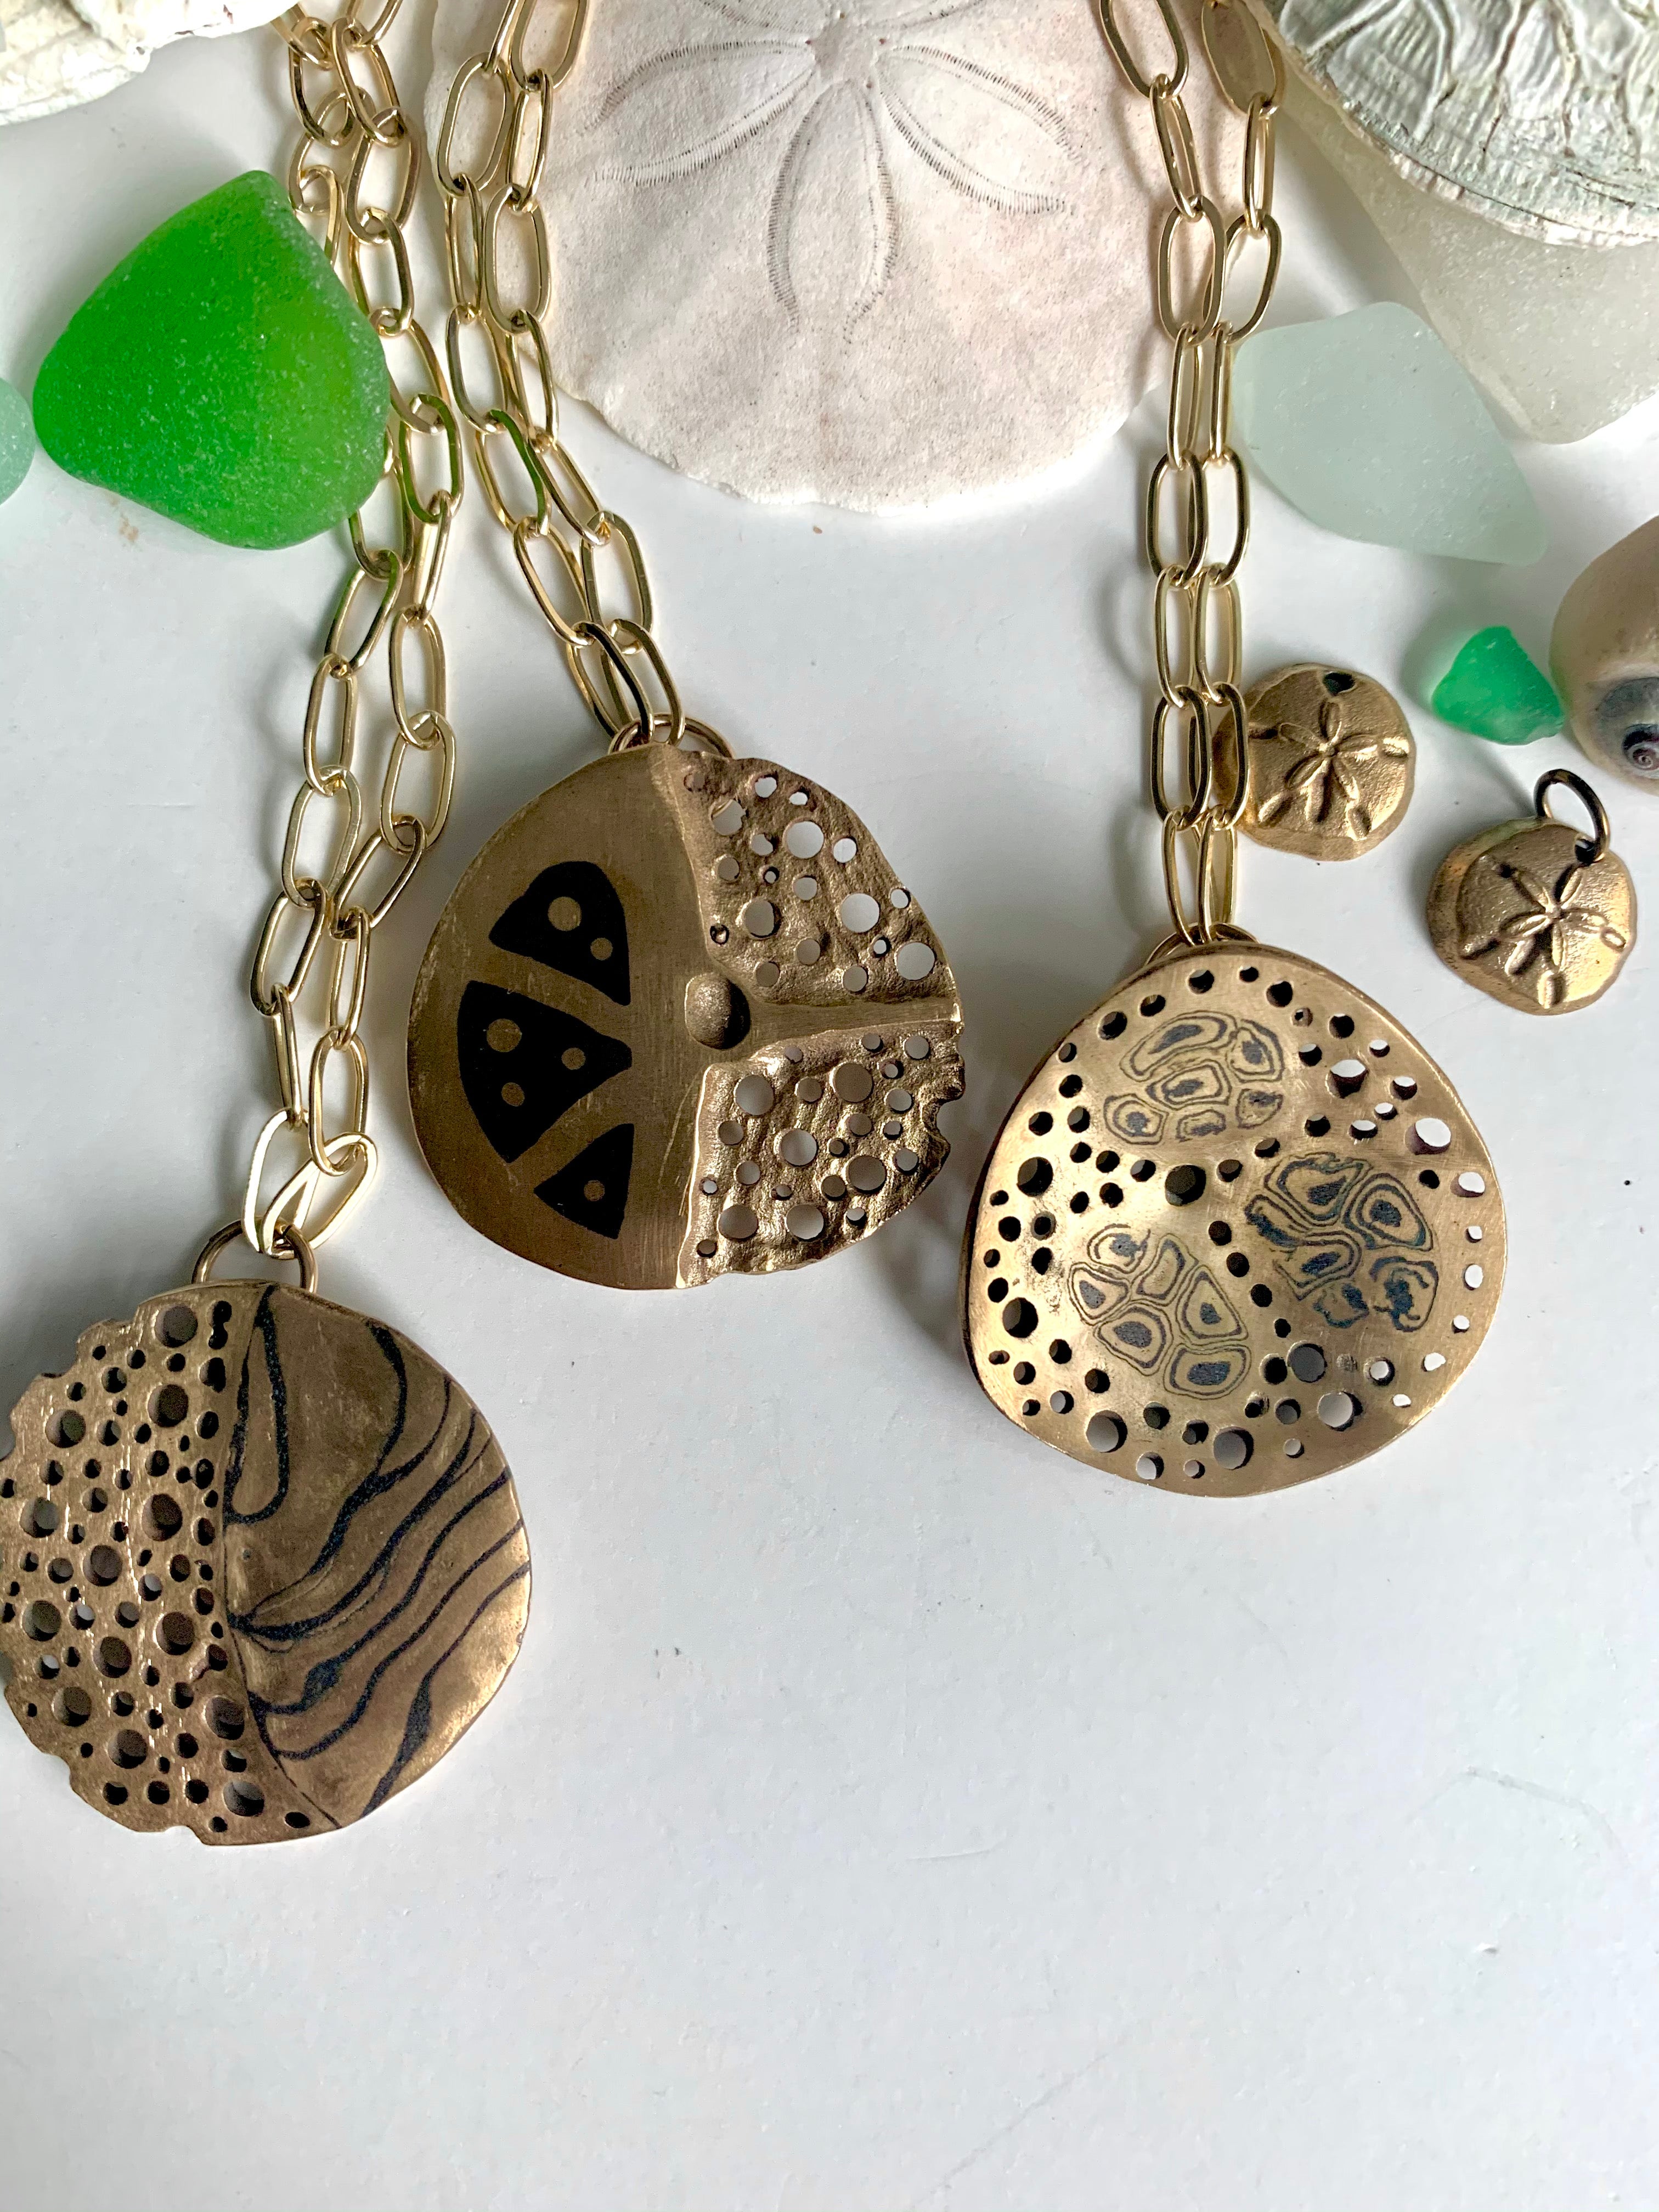 Sea shells with ocean inspired art jewelry necklaces